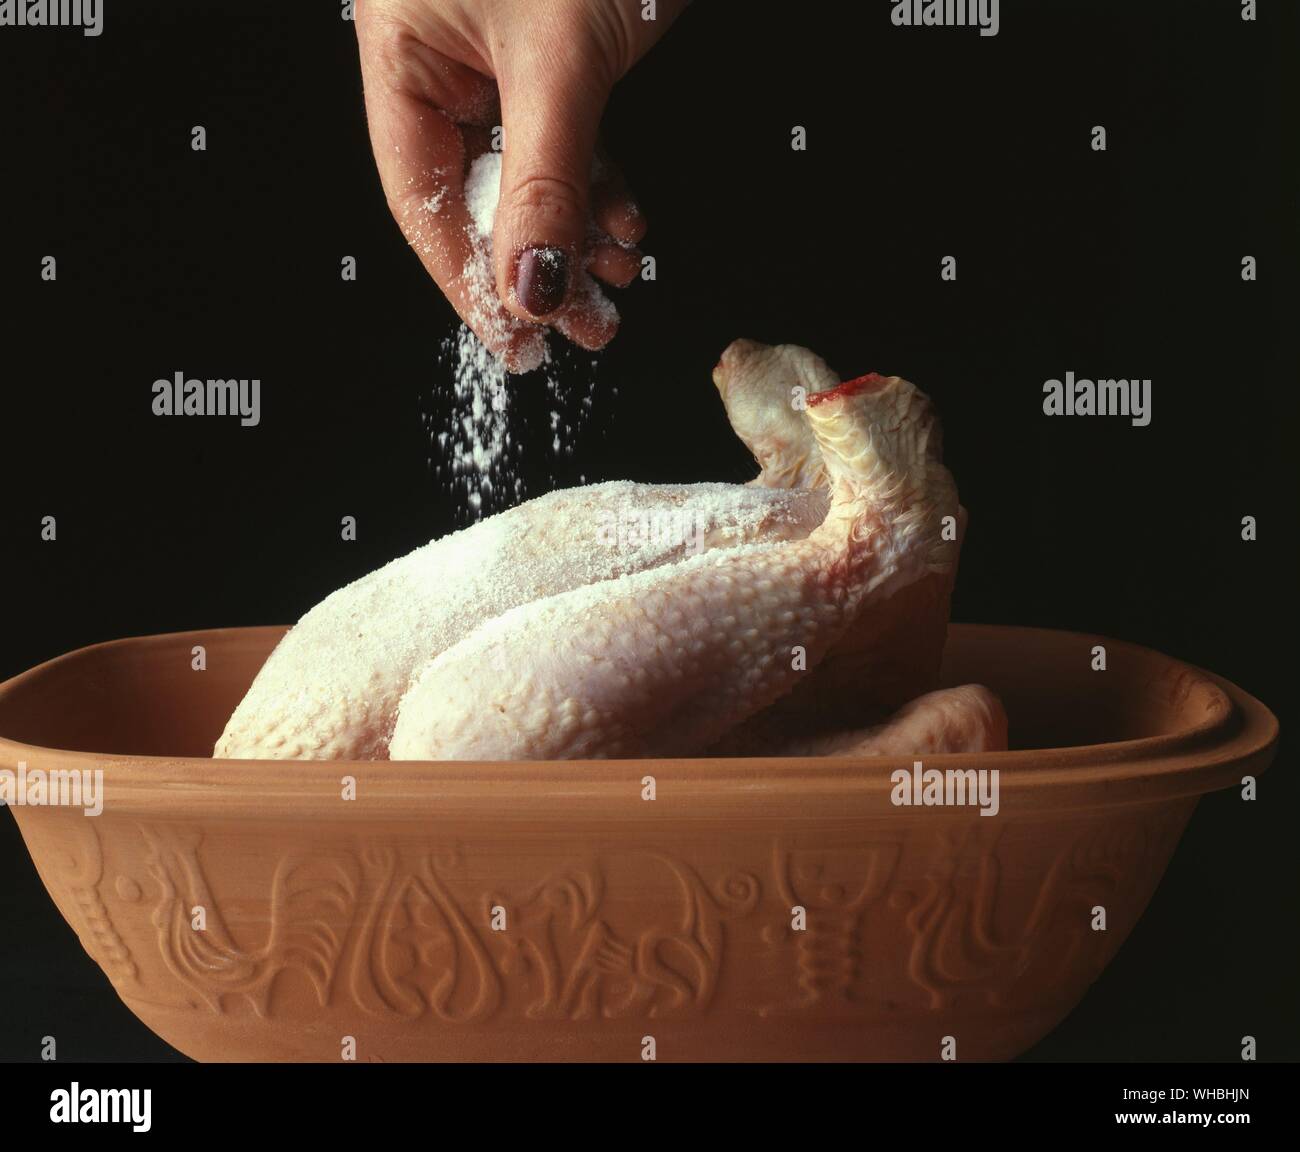 Whole Chicken : Preparing the poultry for roasting and seasoning with salt before cooking in the oven Stock Photo